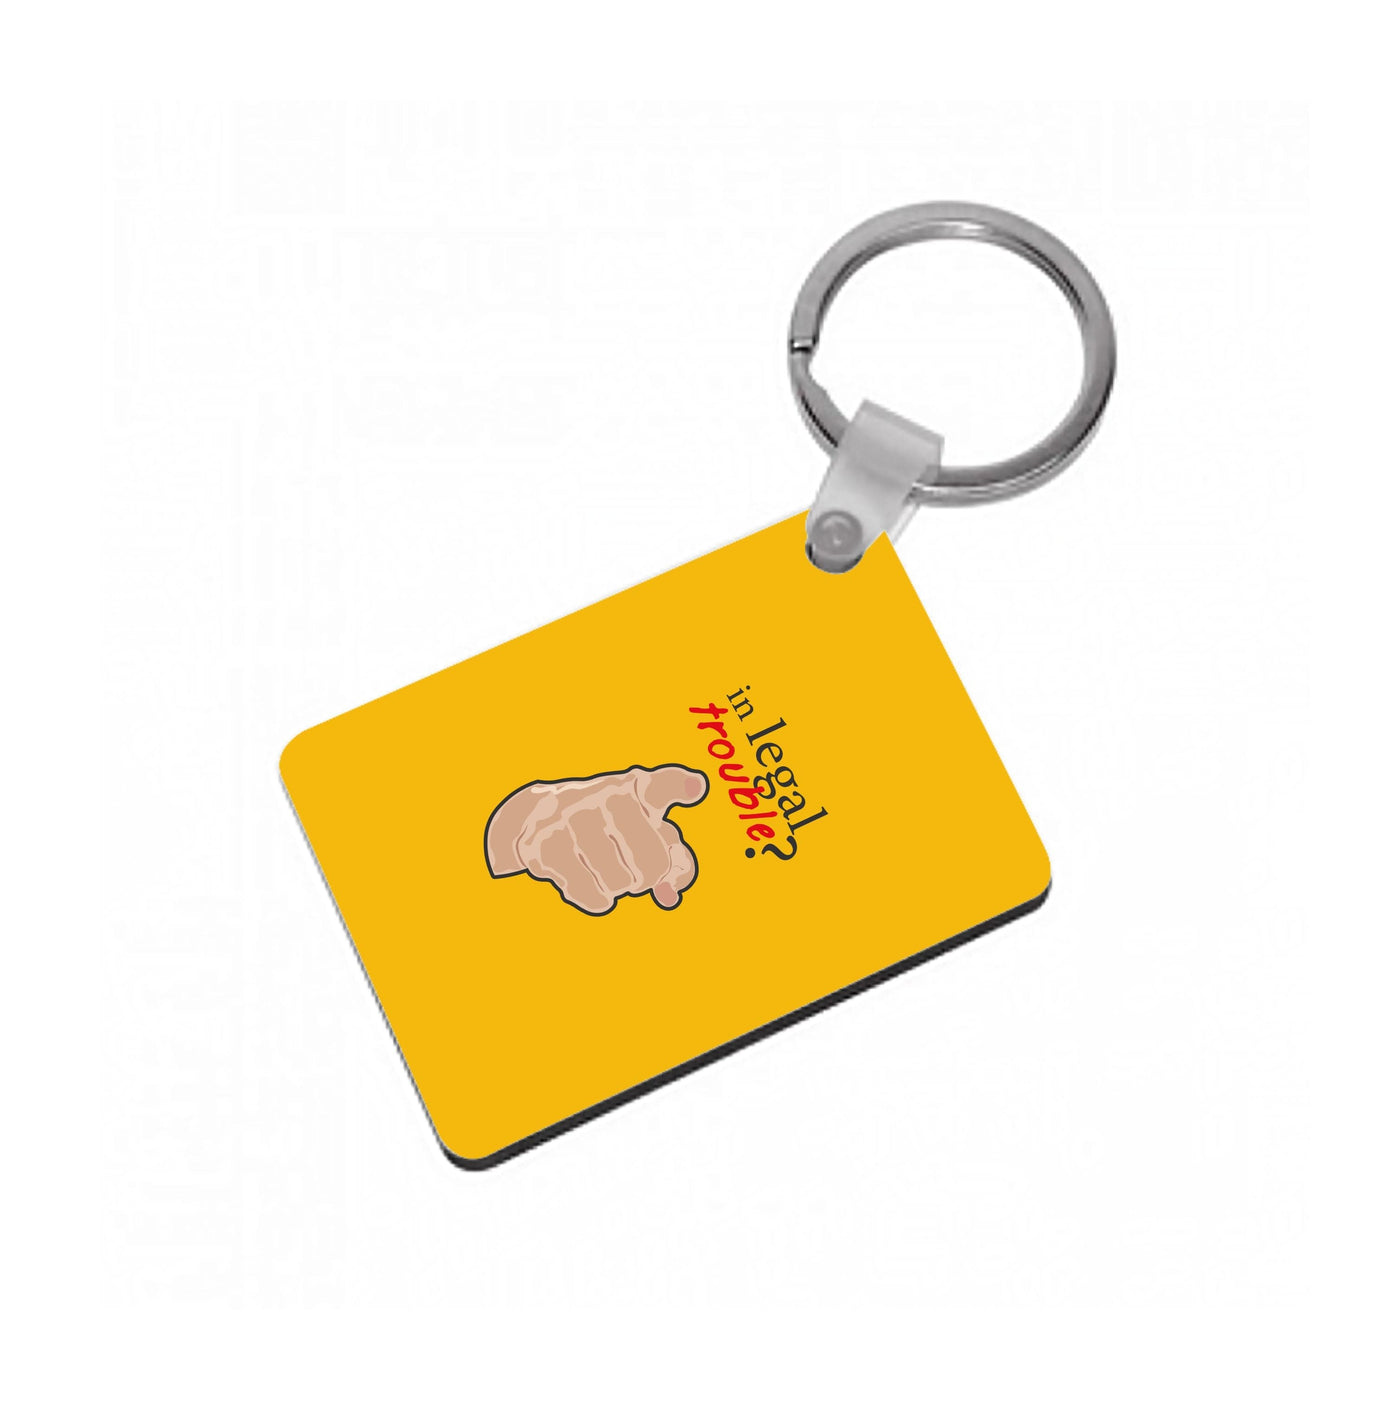 In Legal Trouble? - Better Call Saul Keyring